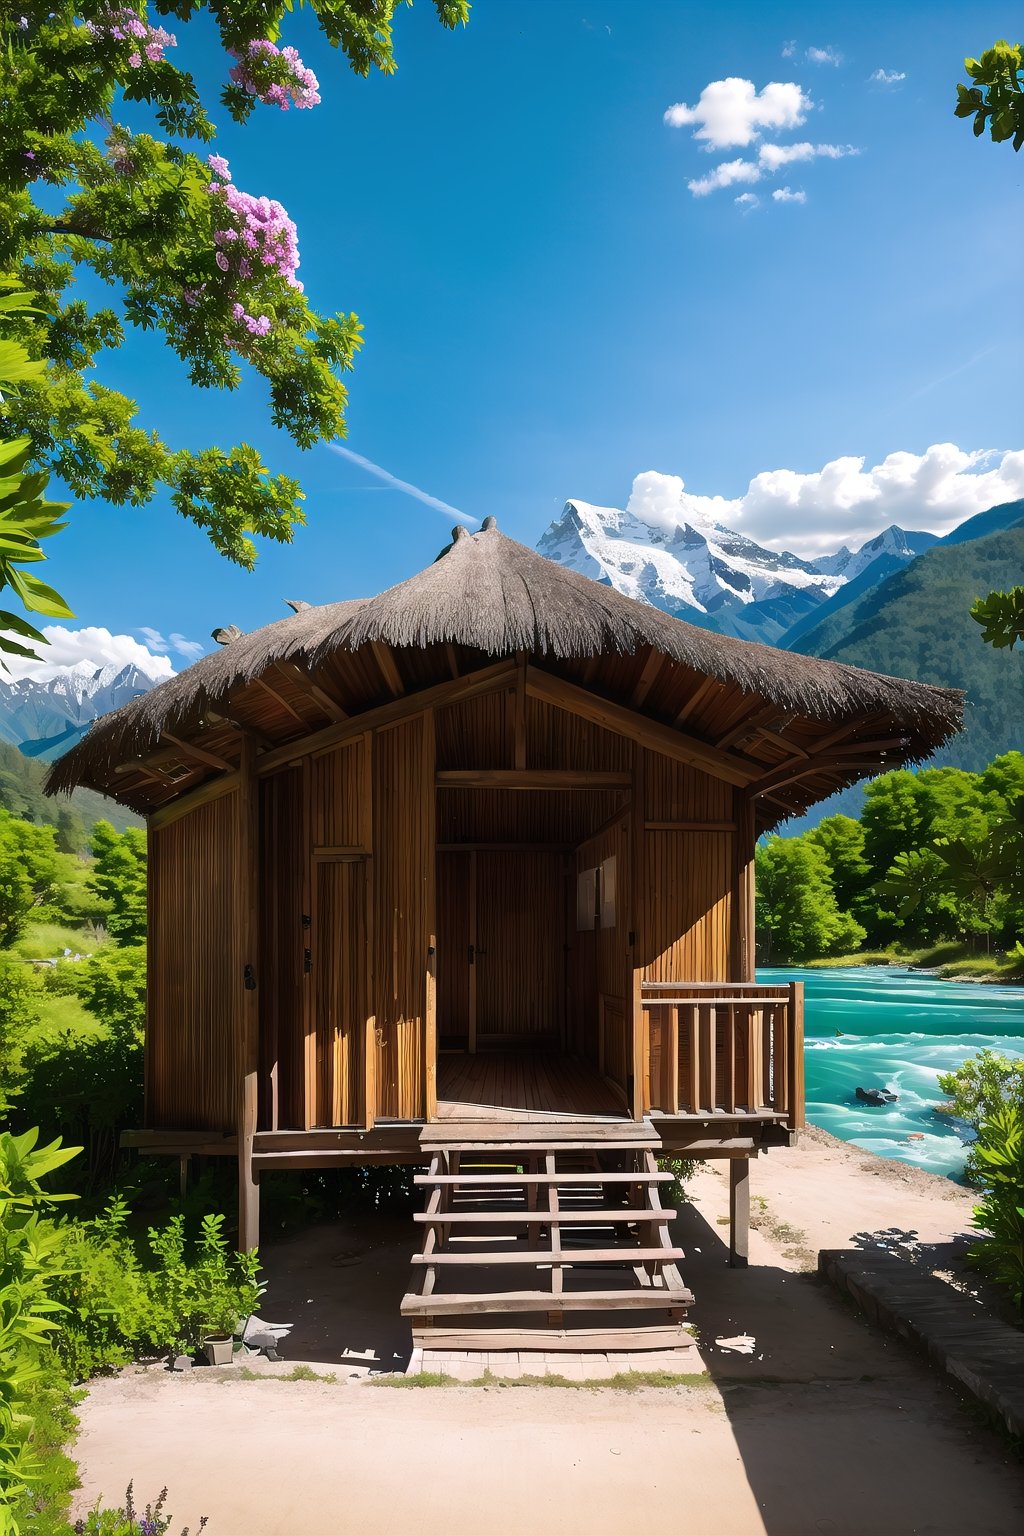 a village beautiful stilt hut made of local bush material, situated near a mountain river, surrounded by beautiful flowers, more huts at background, sealed footpaths connecting houses, mountains at background